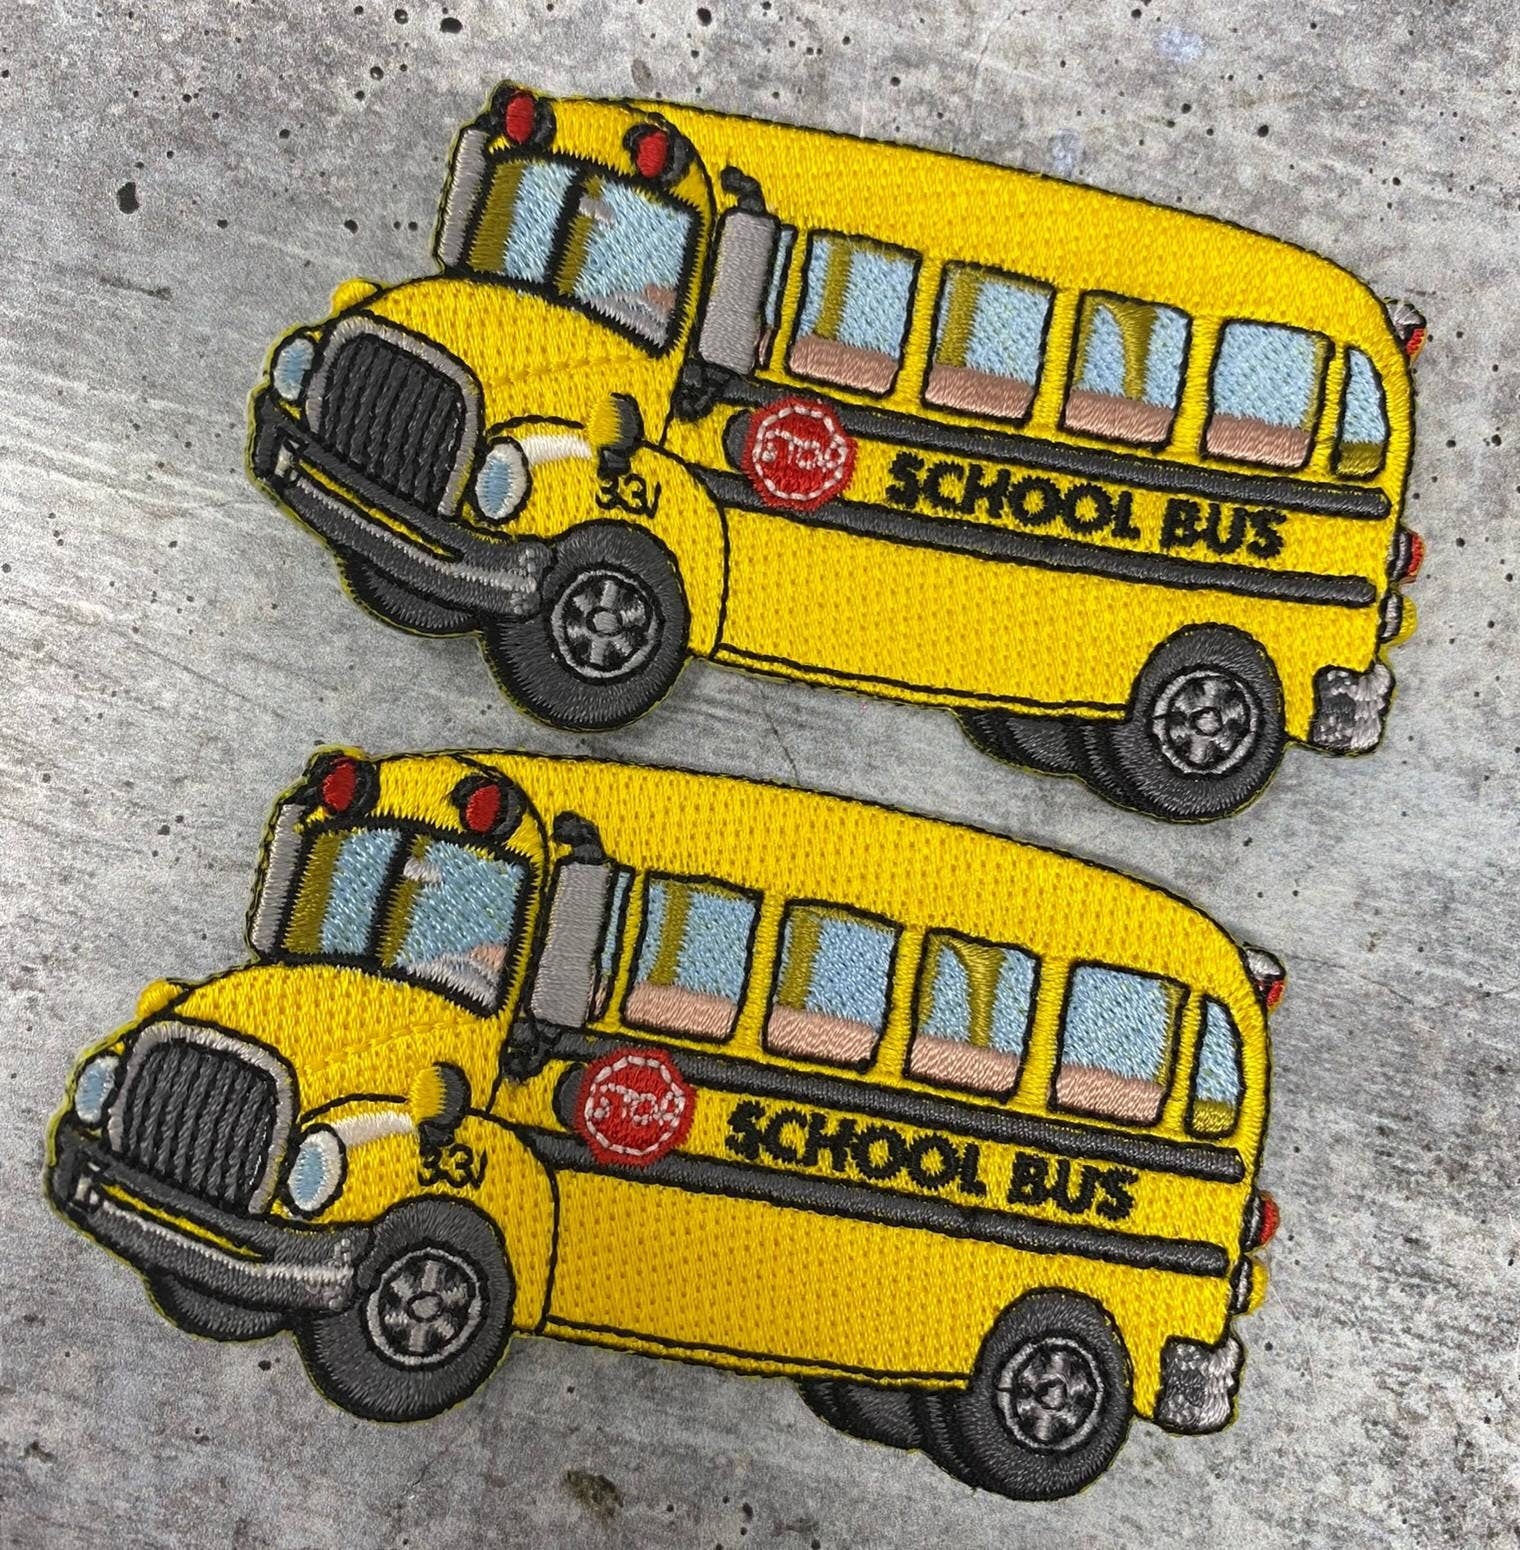 NEW Arrival,"School Bus" 100% Embroidered Patch, Small Iron-on Embroidered, Size 3.5", Cute Yellow Badge for Jackets, Hats, Camos, and Crocs